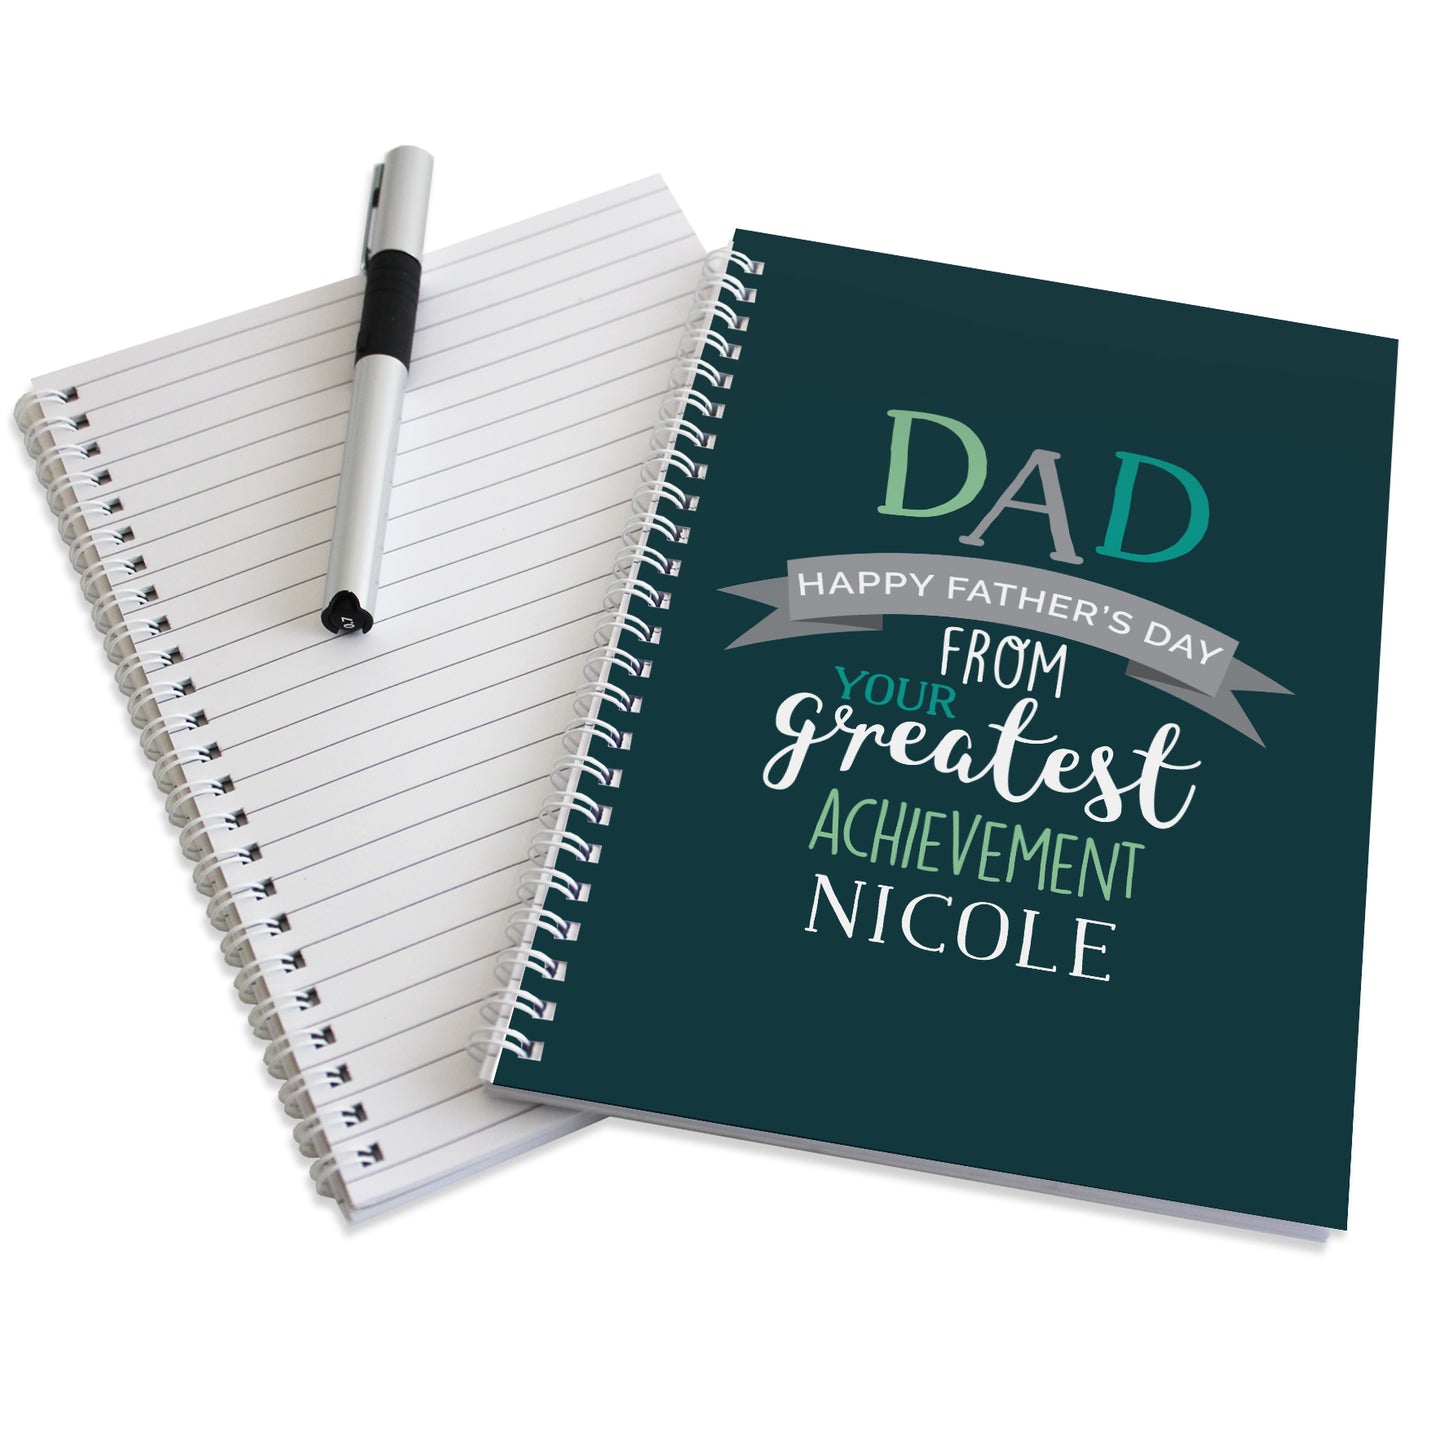 Personalised Dad's Greatest Achievement A5 Notebook - Personalise It!